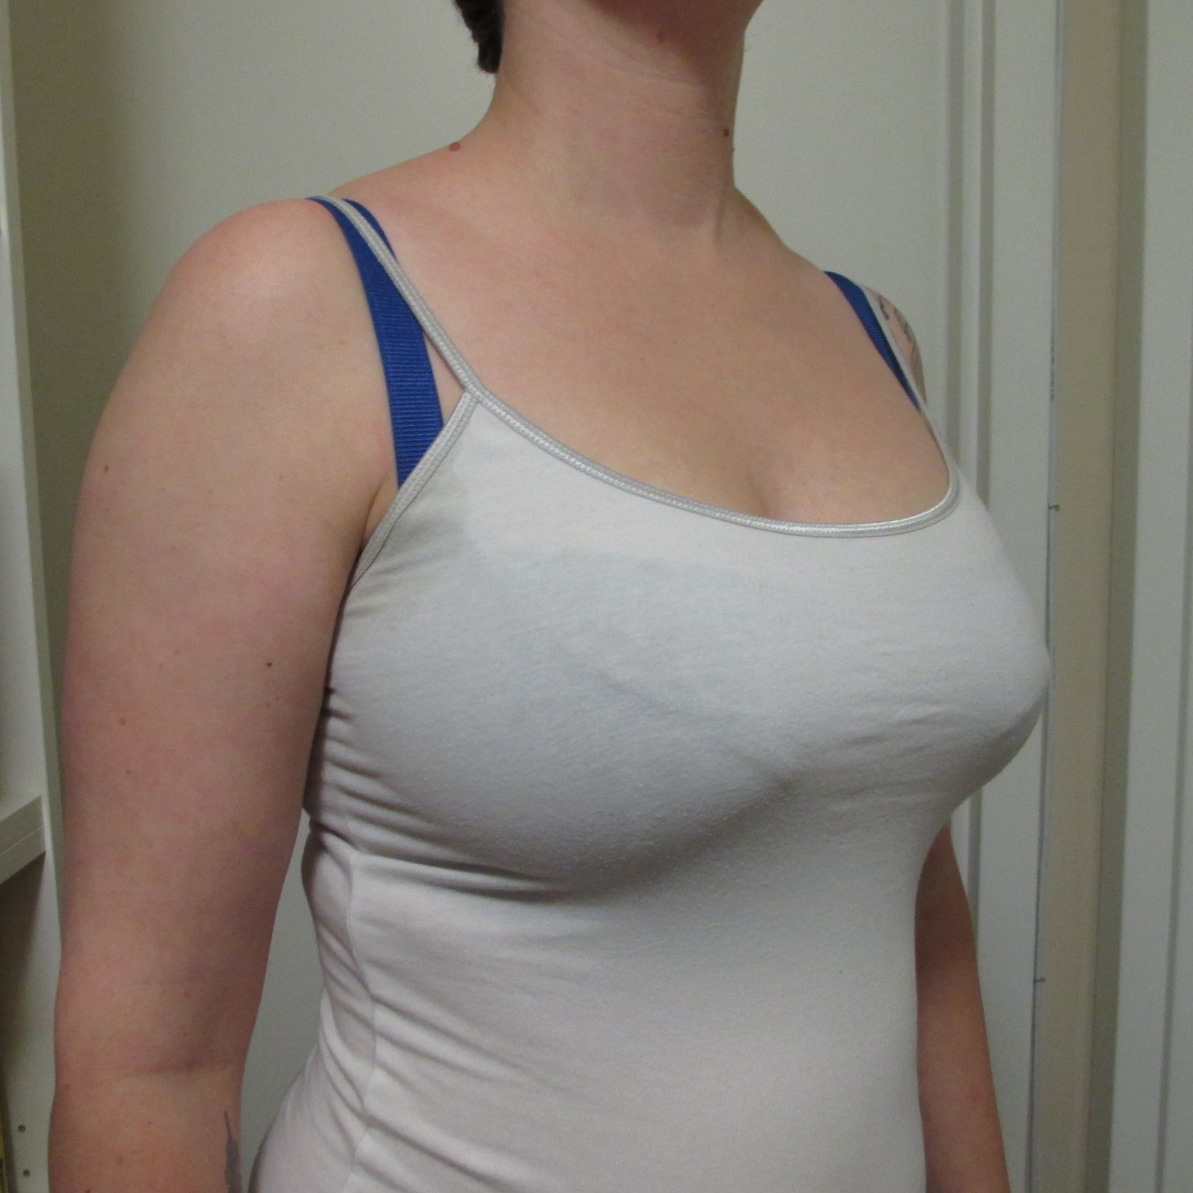 Off the Rack ~ Reviewing Cleo by Panache's “Hettie” Bra –